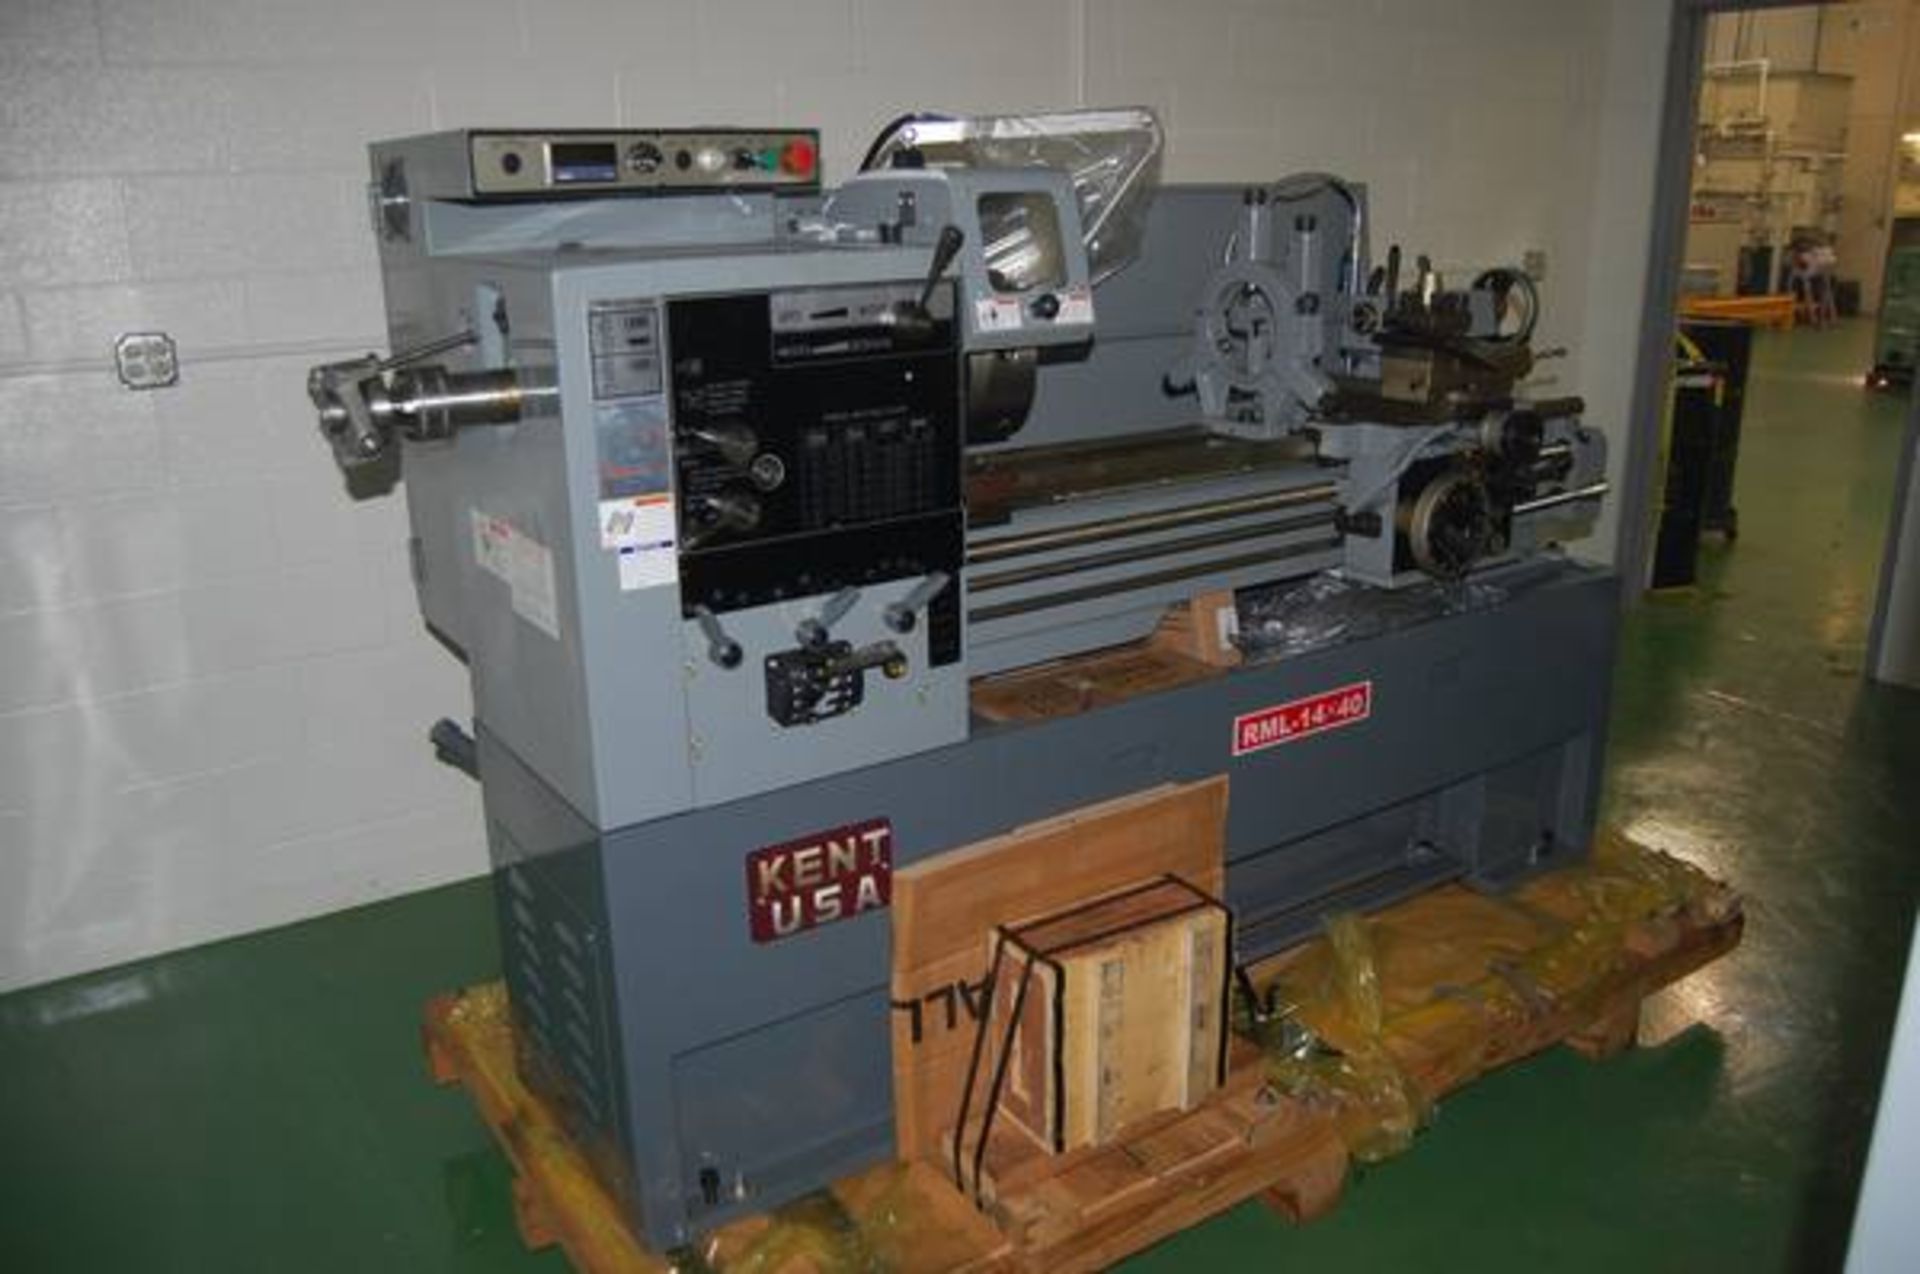 Kent Corp. Model RML-1440VT 14" x 40"   Gap Bed Engine Lathe; Serial Number: 14414092743 (2014); NEW